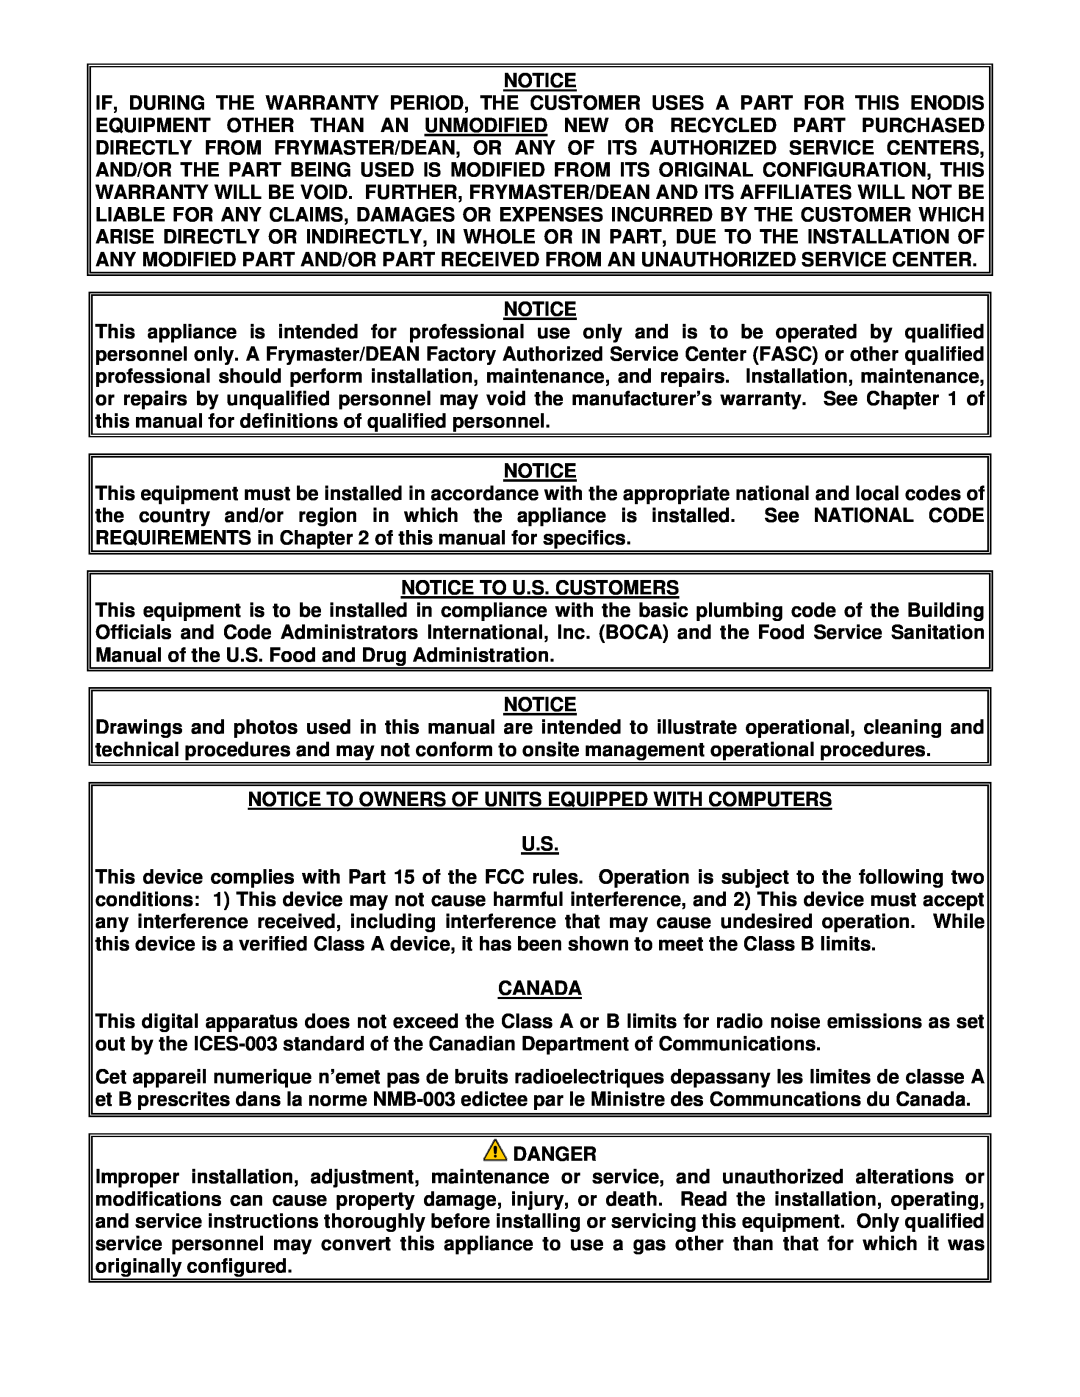 Frymaster 35 Series manual Notice To U.S. Customers, Notice To Owners Of Units Equipped With Computers, Canada, Danger 